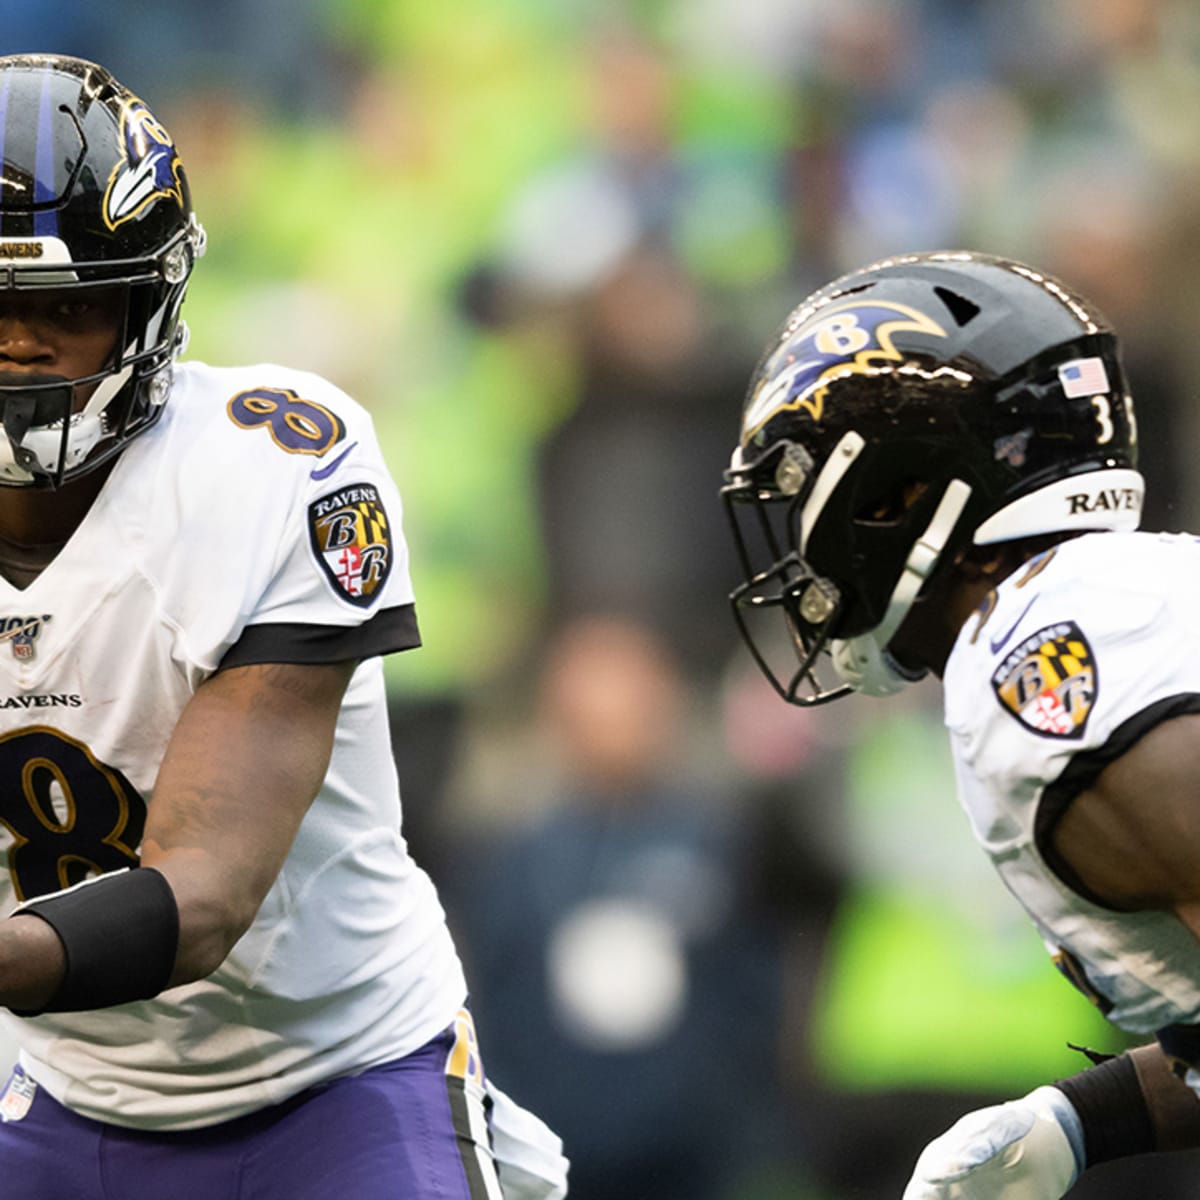 Ravens vs Bengals live stream Watch online, TV channel, time